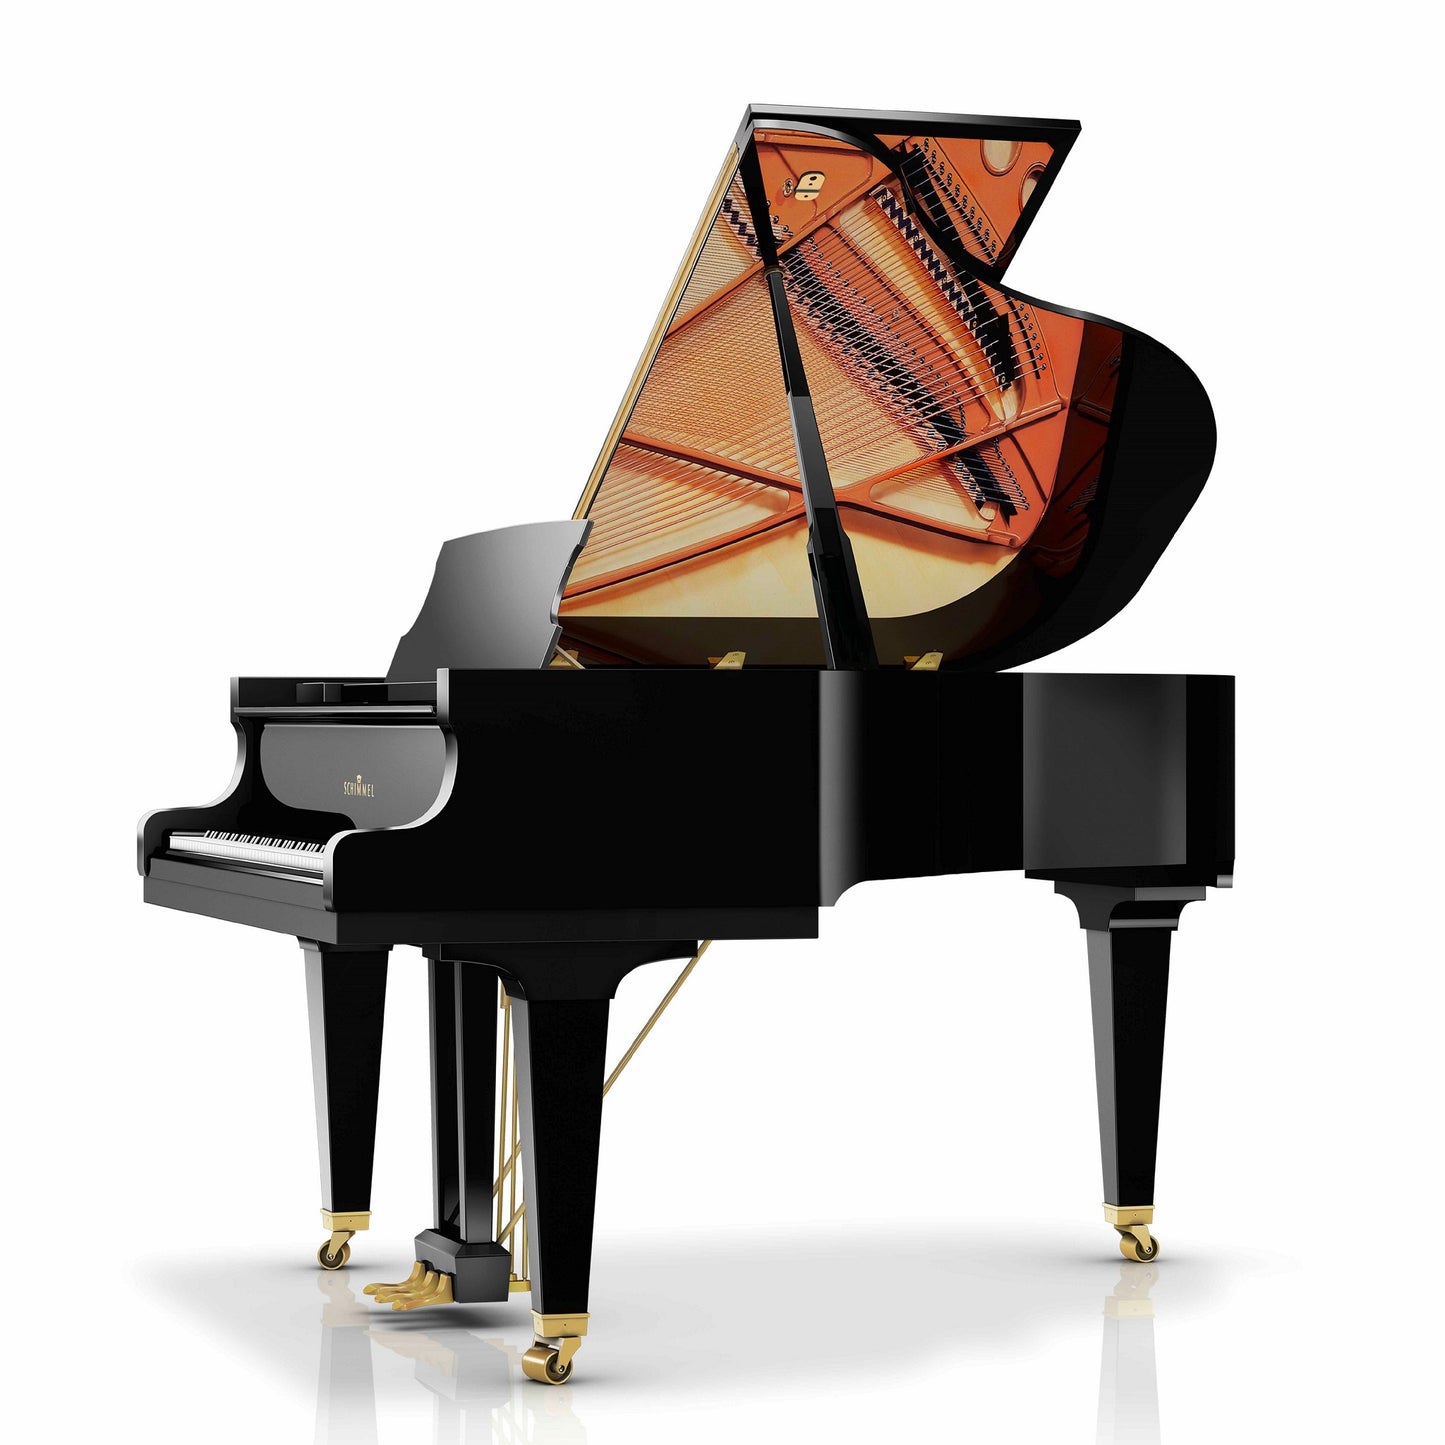 Schimmel Fridolin F156 Grand Piano with PianoDisc Prodigy Player System